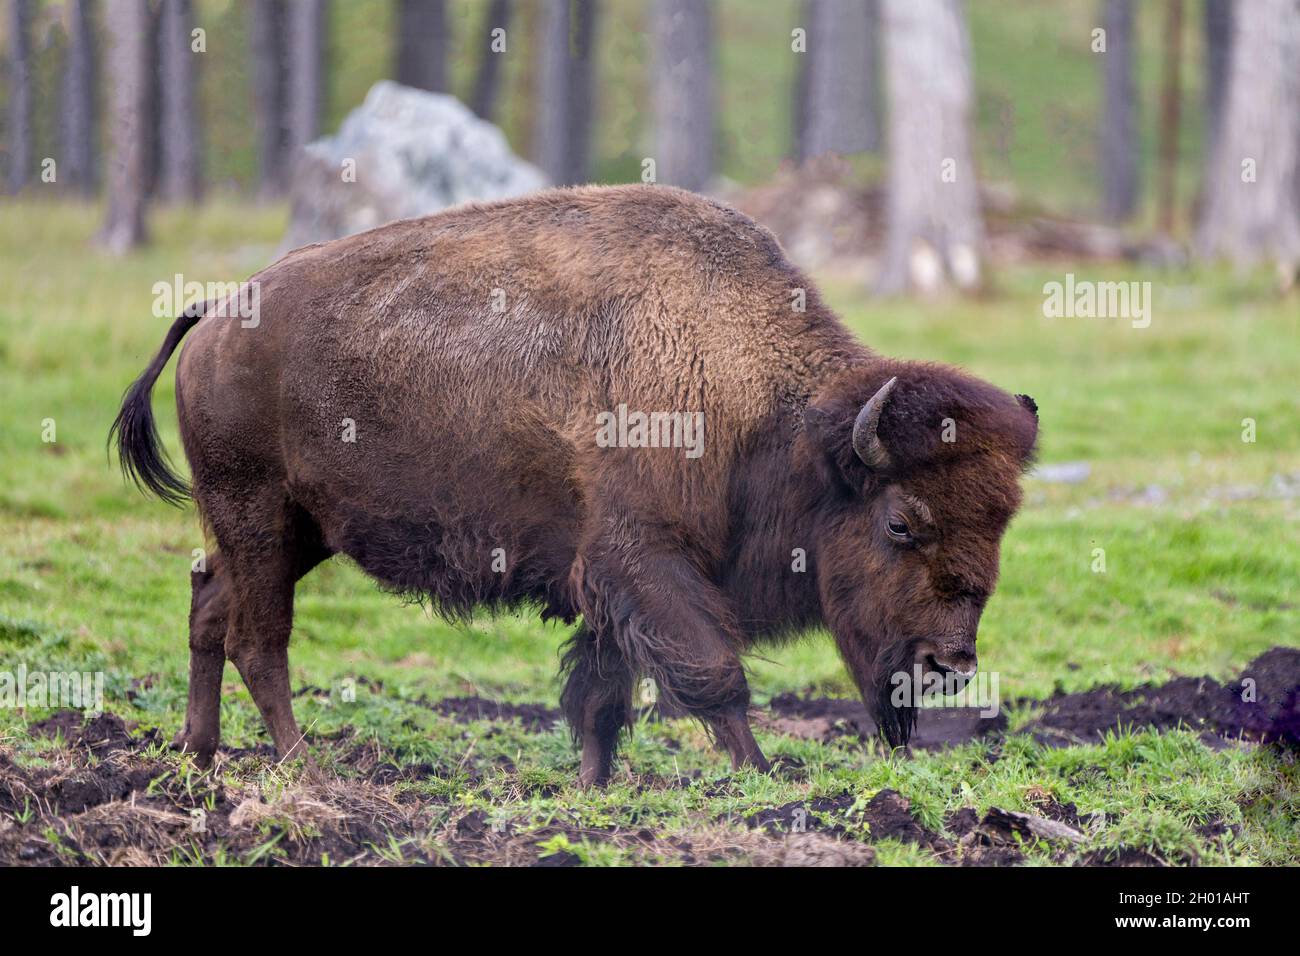 Bison close-up side view walking in the field with a blur forest background displaying large body and horns in its environment and habitat surrounding Stock Photo